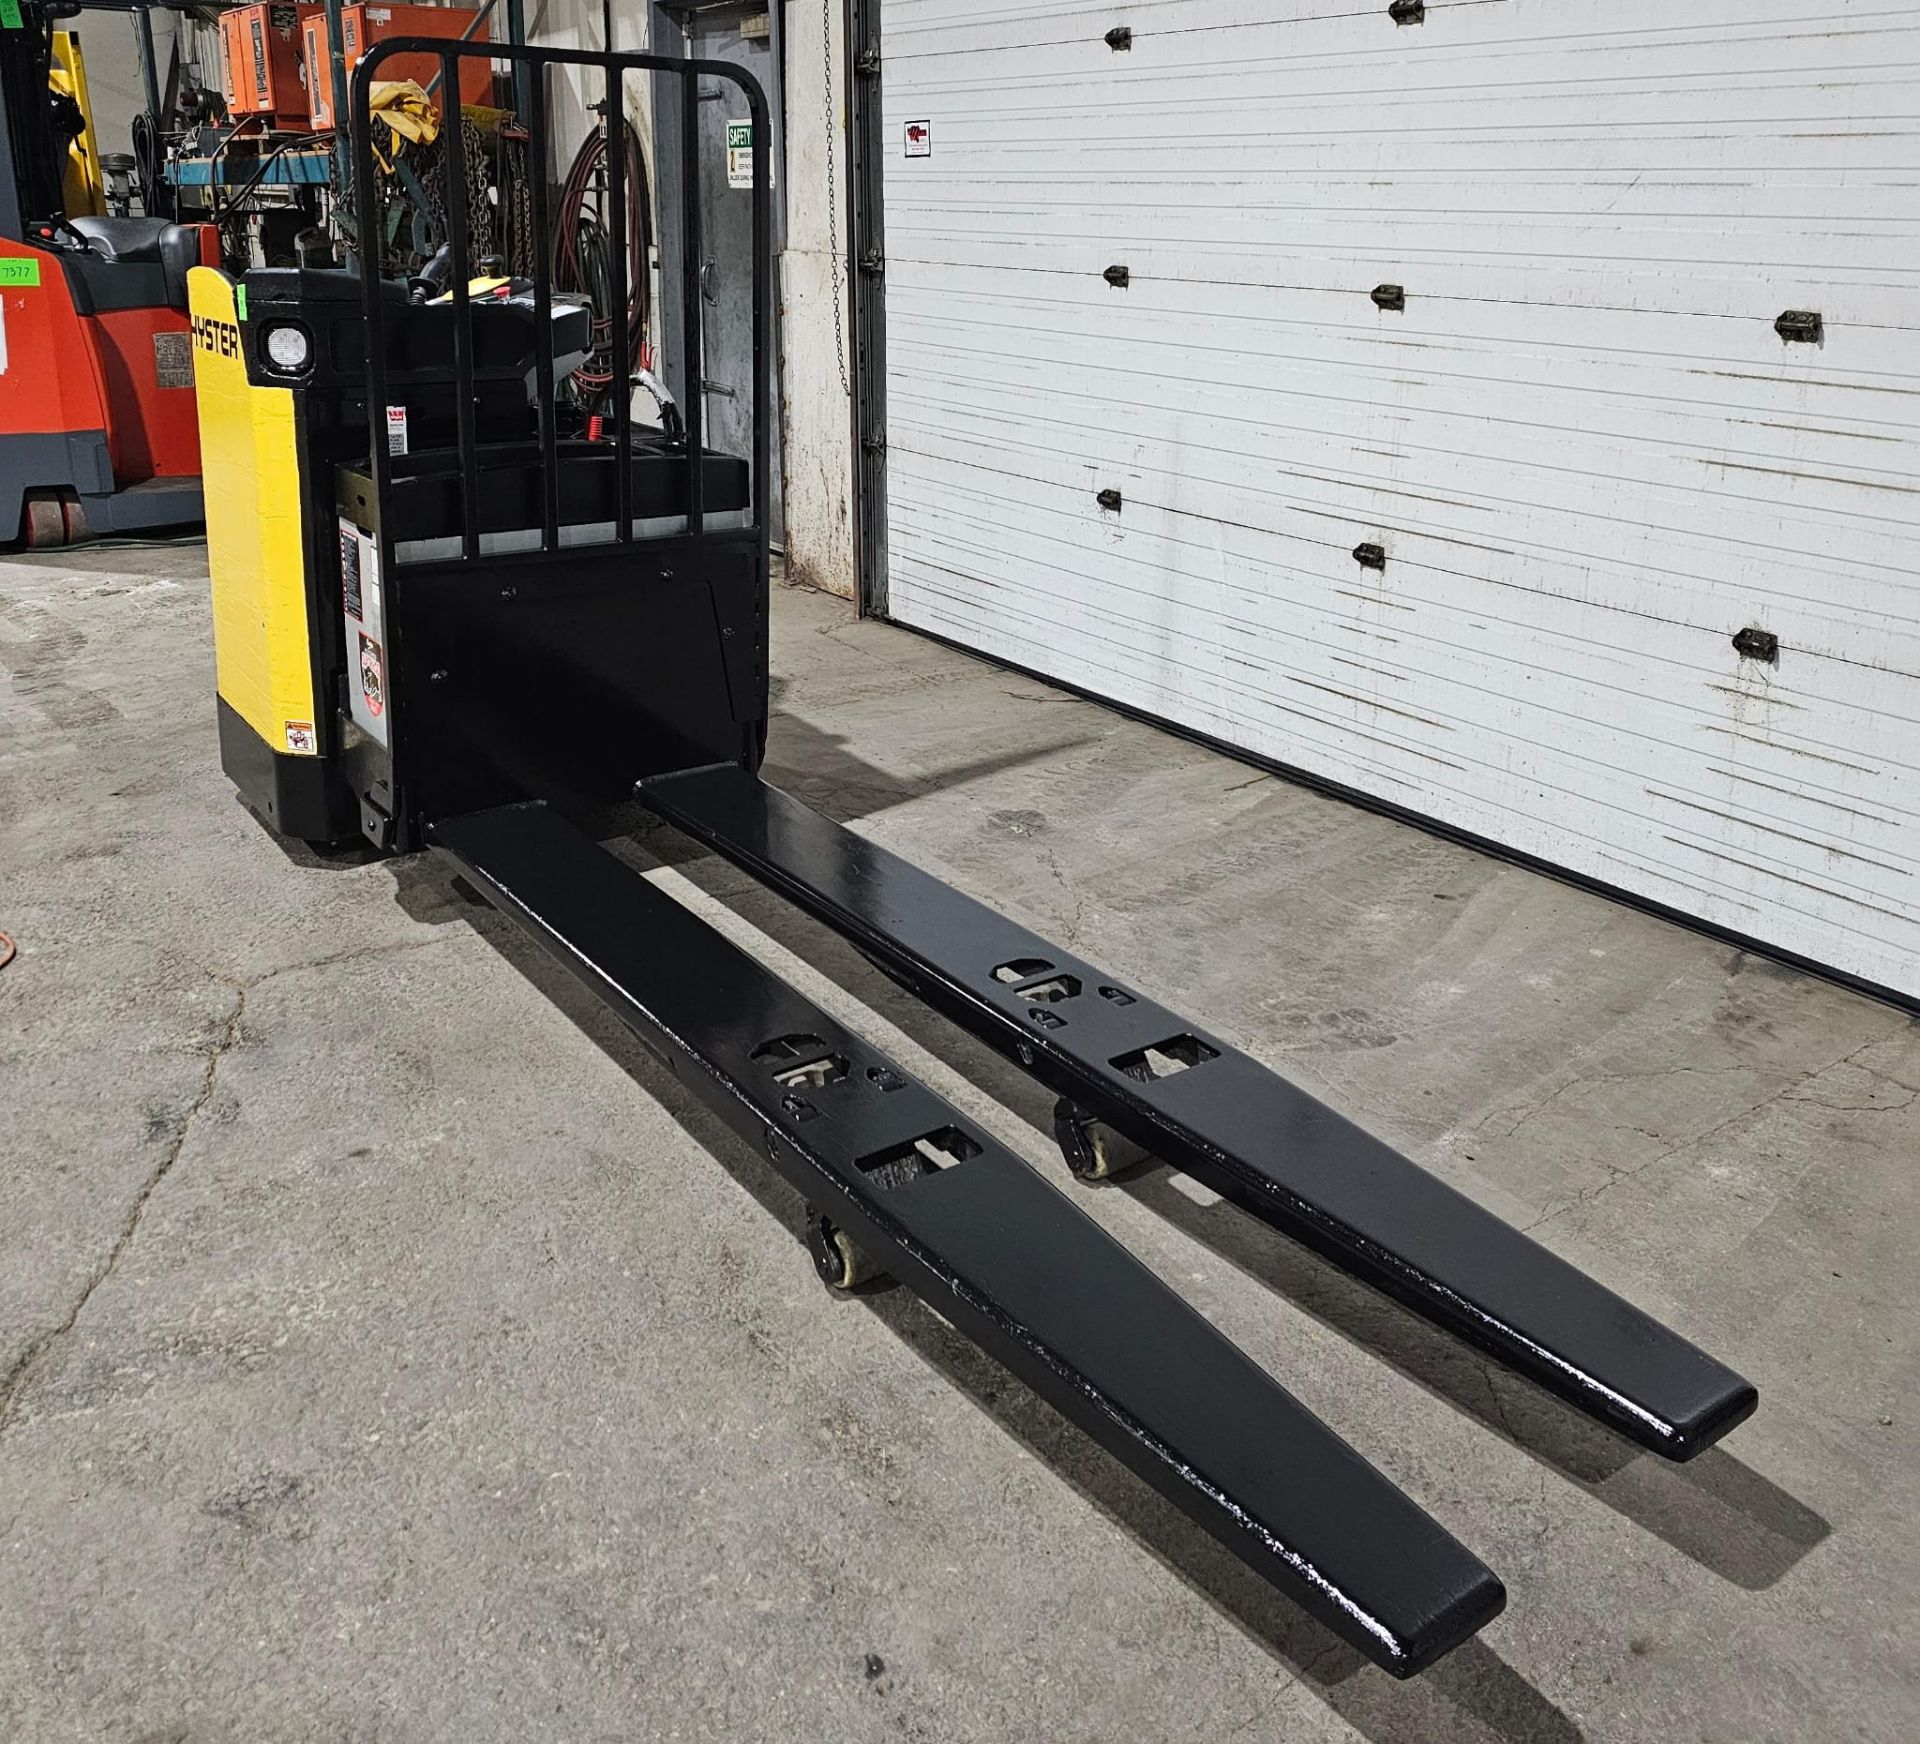 2015 Hyster Long John RIDE ON 8000lbs capacity 96" Forks Powered Pallet Cart 24V - Ride on unit - Image 2 of 5